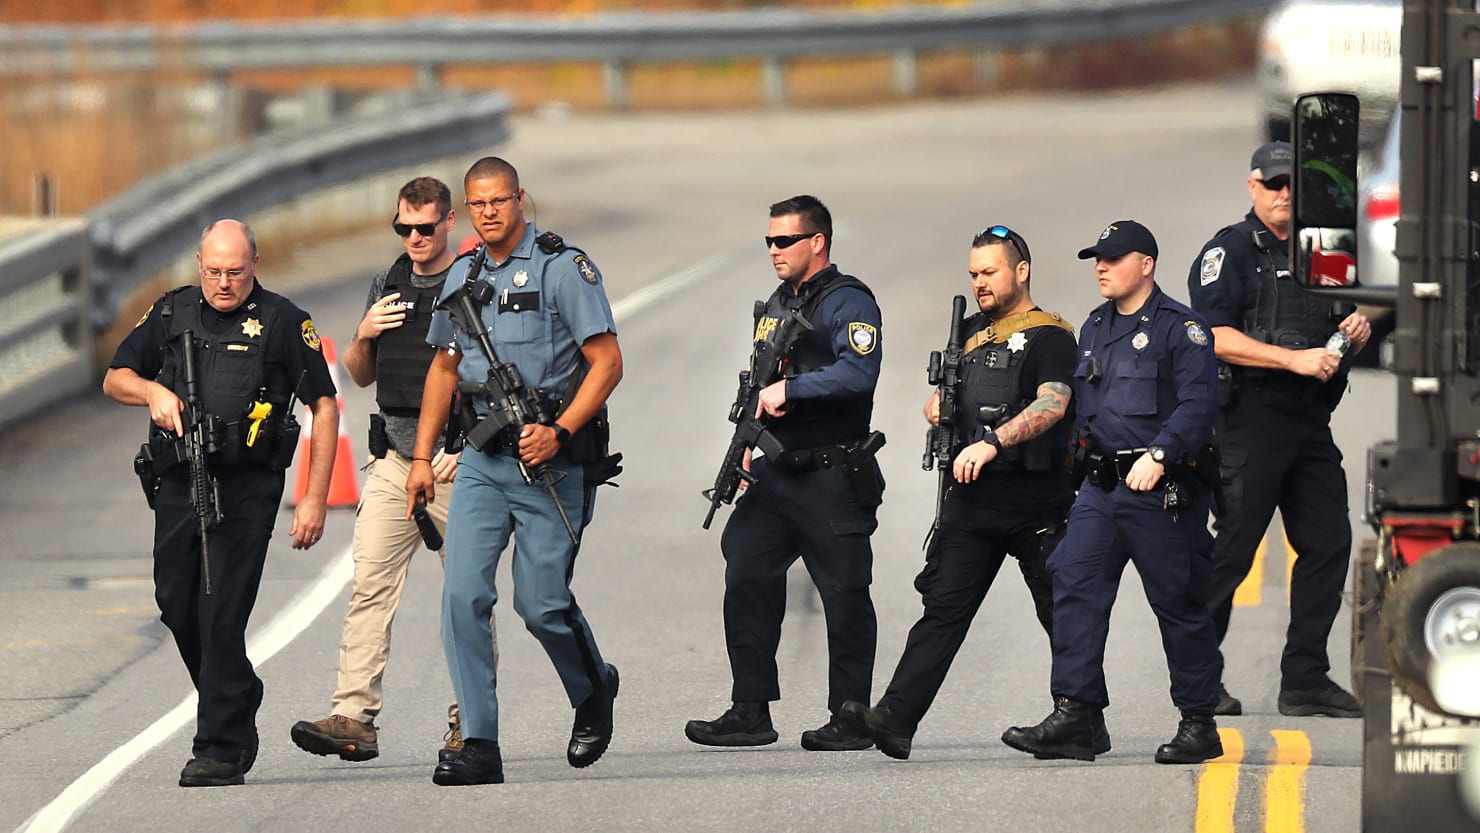 Review Details Officials’ Warnings Ahead of Maine Shooting